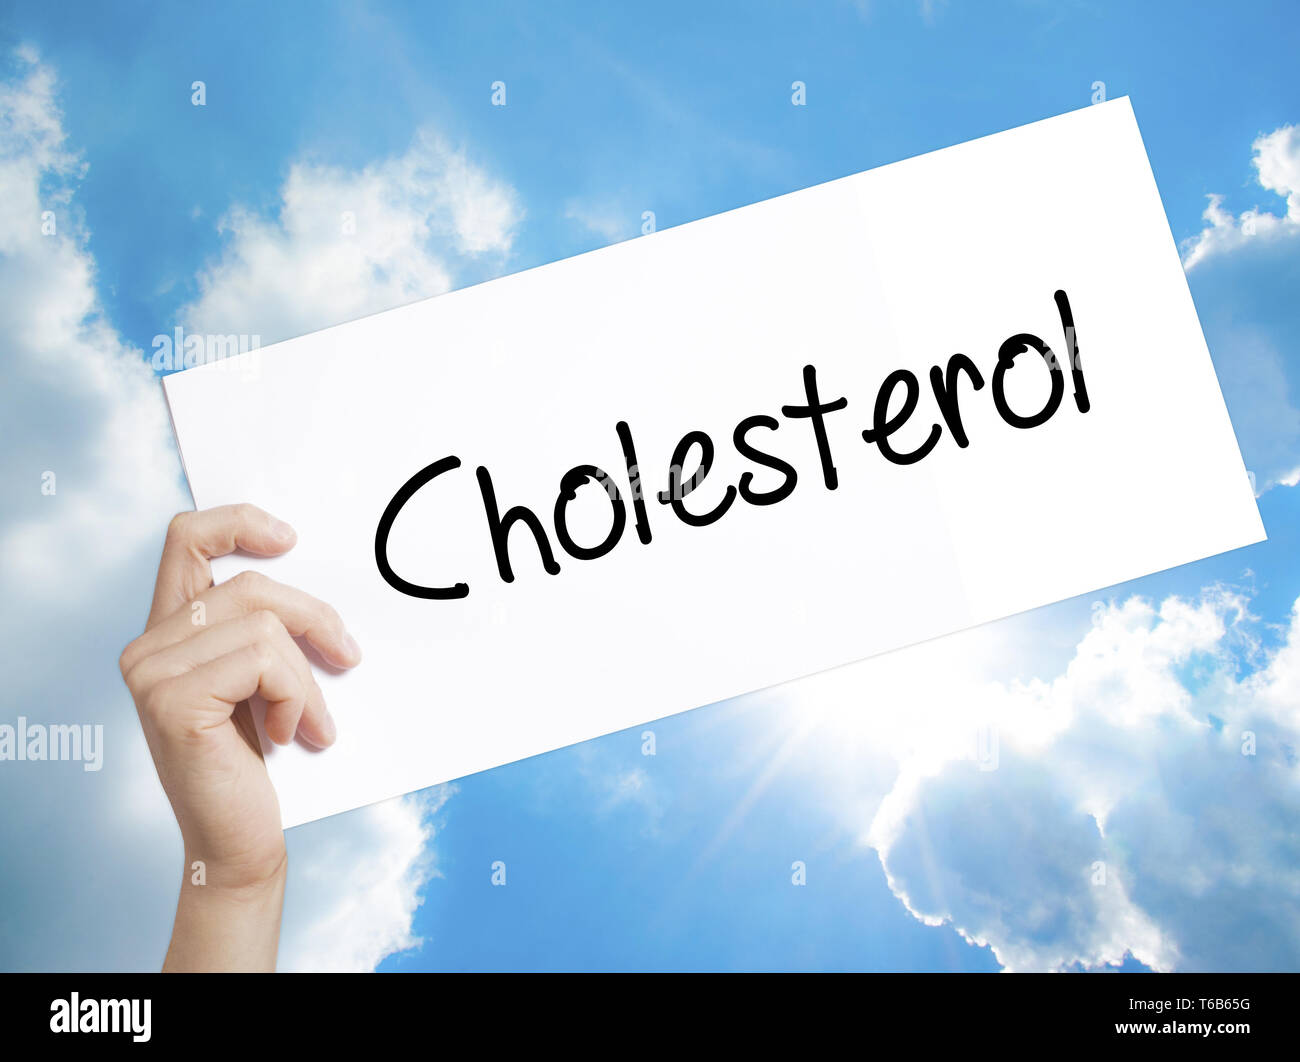 Cholesterol Sign on white paper. Man Hand Holding Paper with text. Isolated on sky background. Stock Photo